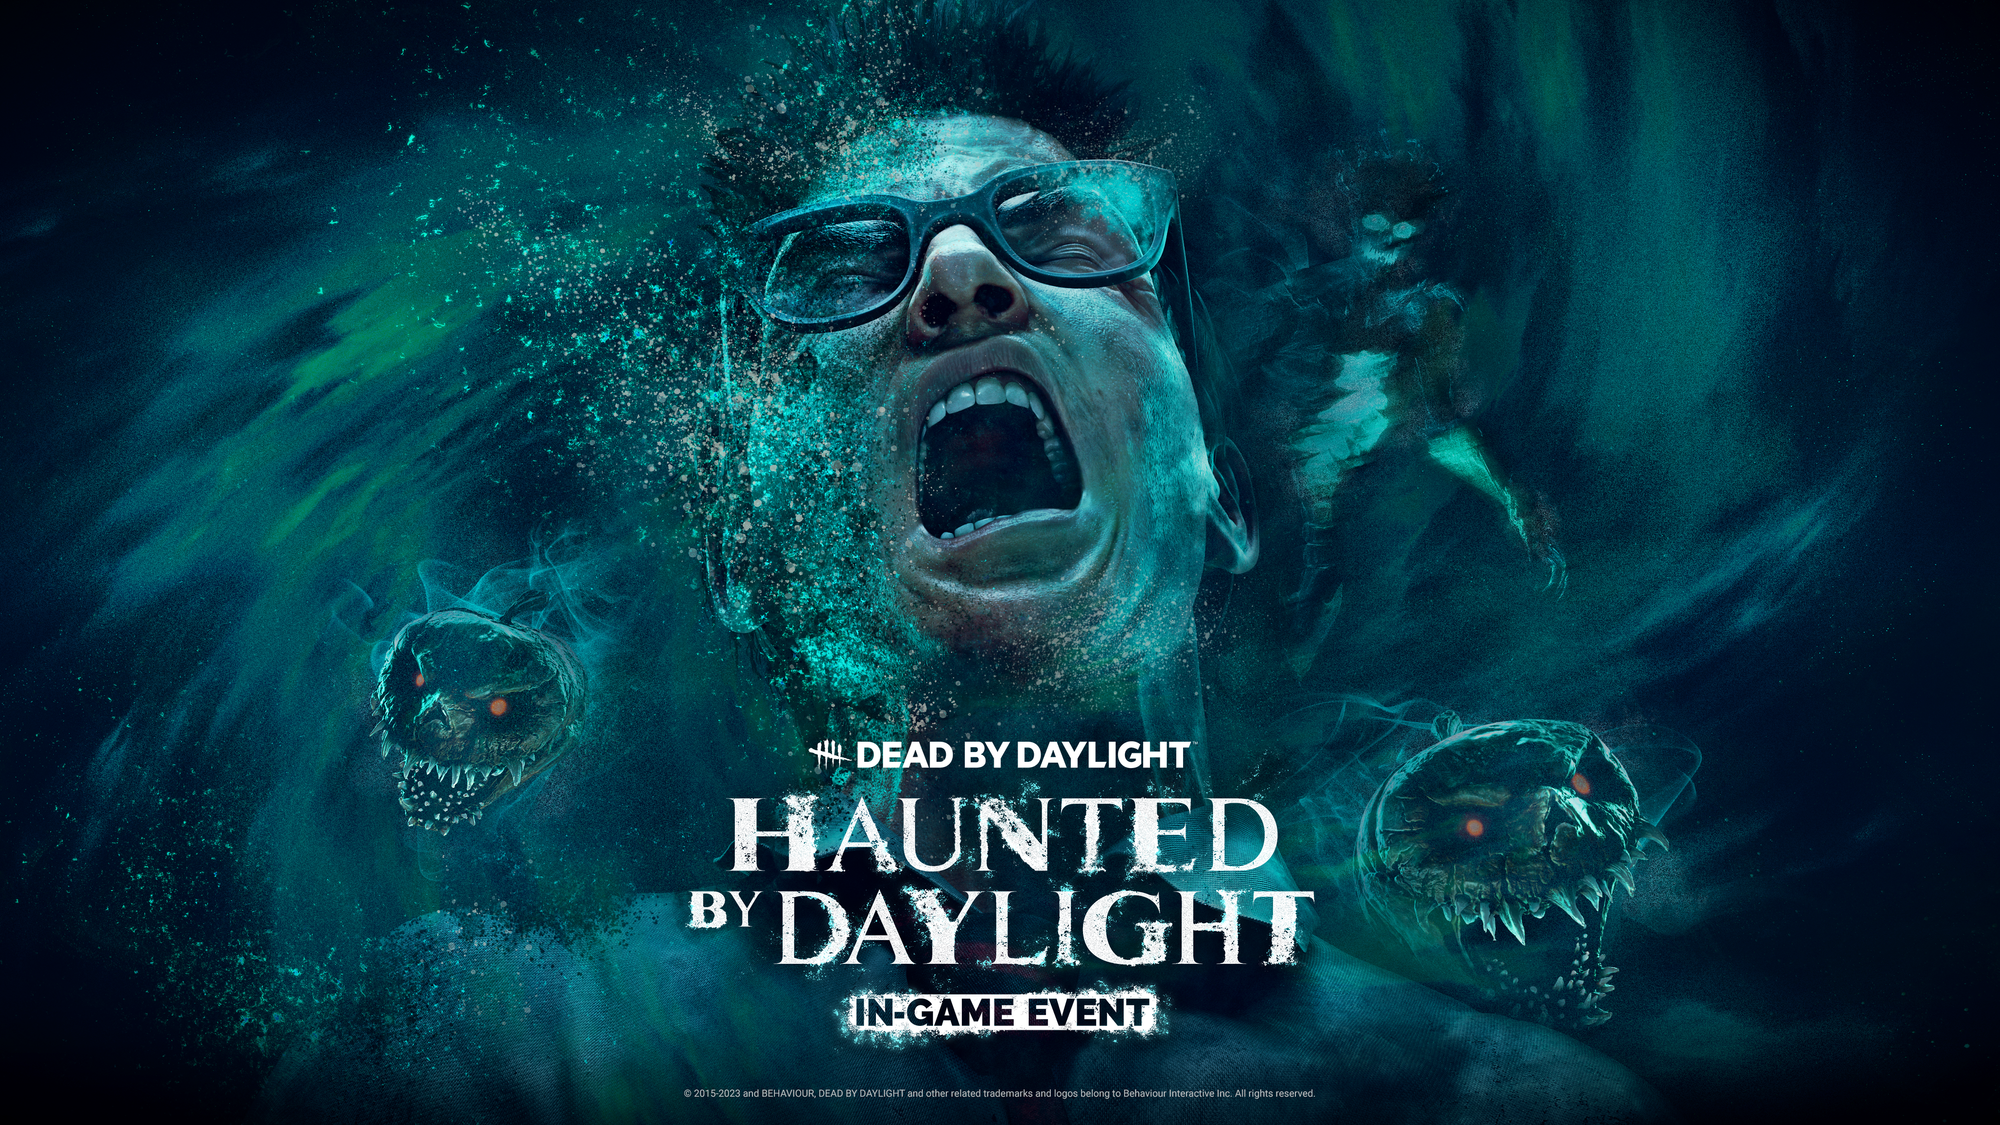 Dead by Daylight Gets Spooky with the Return of the 'Haunted by Daylight' Event